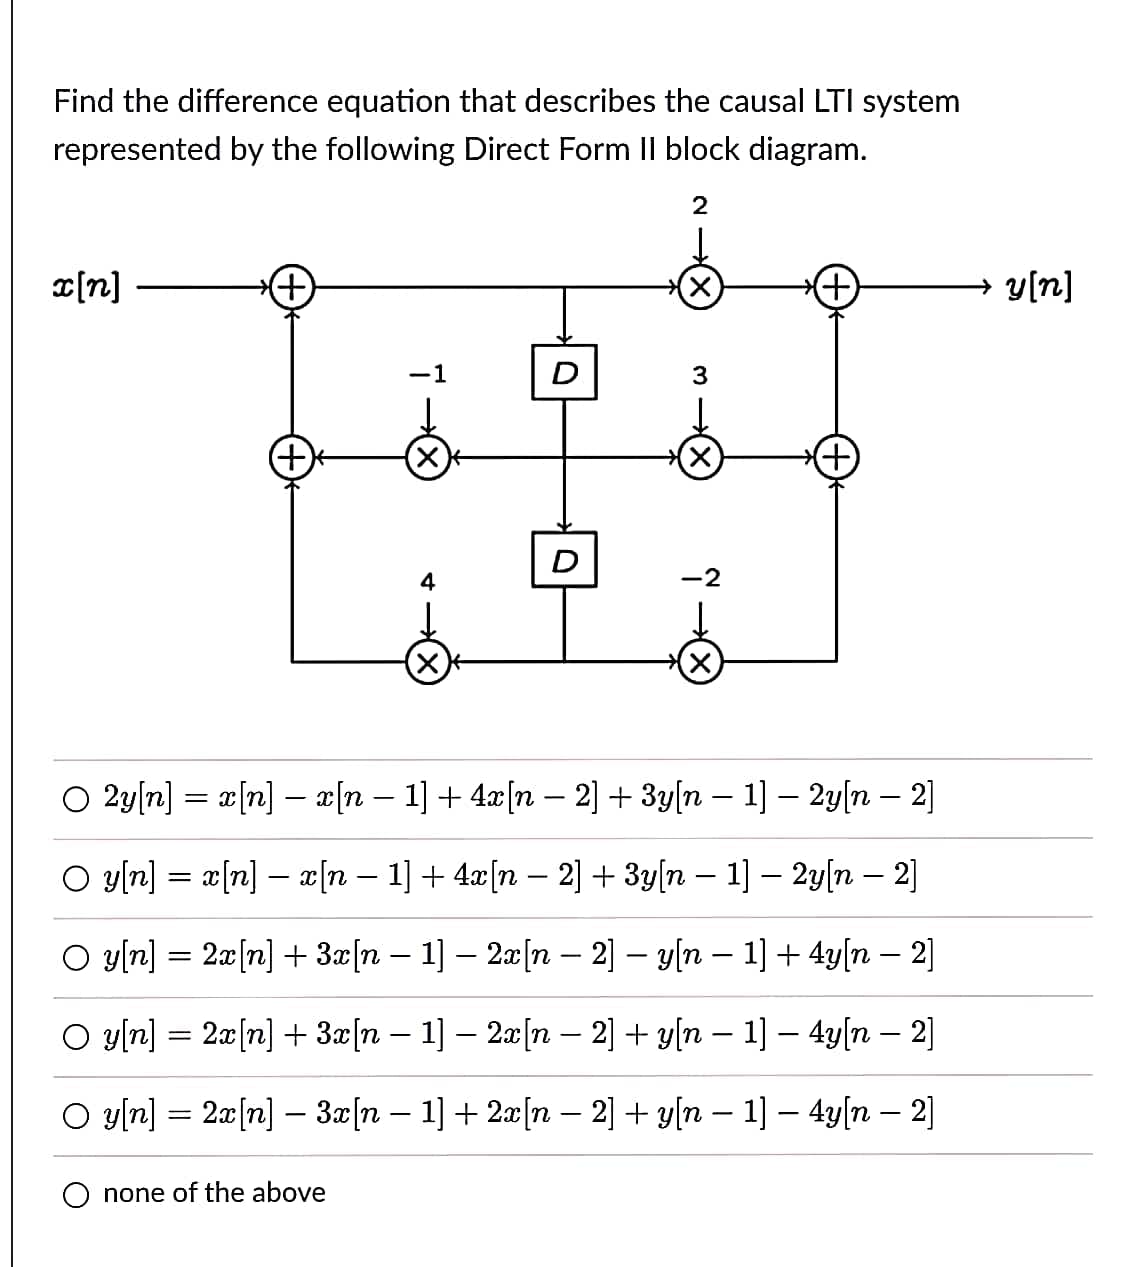 Find the difference equation that describes the causal LTI system
represented by the following Direct Form II block diagram.
2
x[n]
←
-1
none of the above
4
-
D
D
X
3
X
X
O 2y[n] = x[n] - x[n − 1] + 4x[n - 2] + 3y[n 1] - 2y[n - 2]
O y[n] = x[n] - x[n − 1] + 4x[n − 2] + 3y[n − 1] − 2y[n − 2]
-
(+
O y[n] = 2x[n] + 3x[n 1] - 2x[n-2] - y[n 1] + 4y[n - 2]
○ y[n] = 2x[n] + 3x[n − 1] − 2x[n − 2] + y[n − 1] − 4y[n — 2]
○ y[n] = 2x[n] − 3x[n − 1] + 2x[n − 2] + y[n − 1] − 4y[n — 2]
→ y[n]